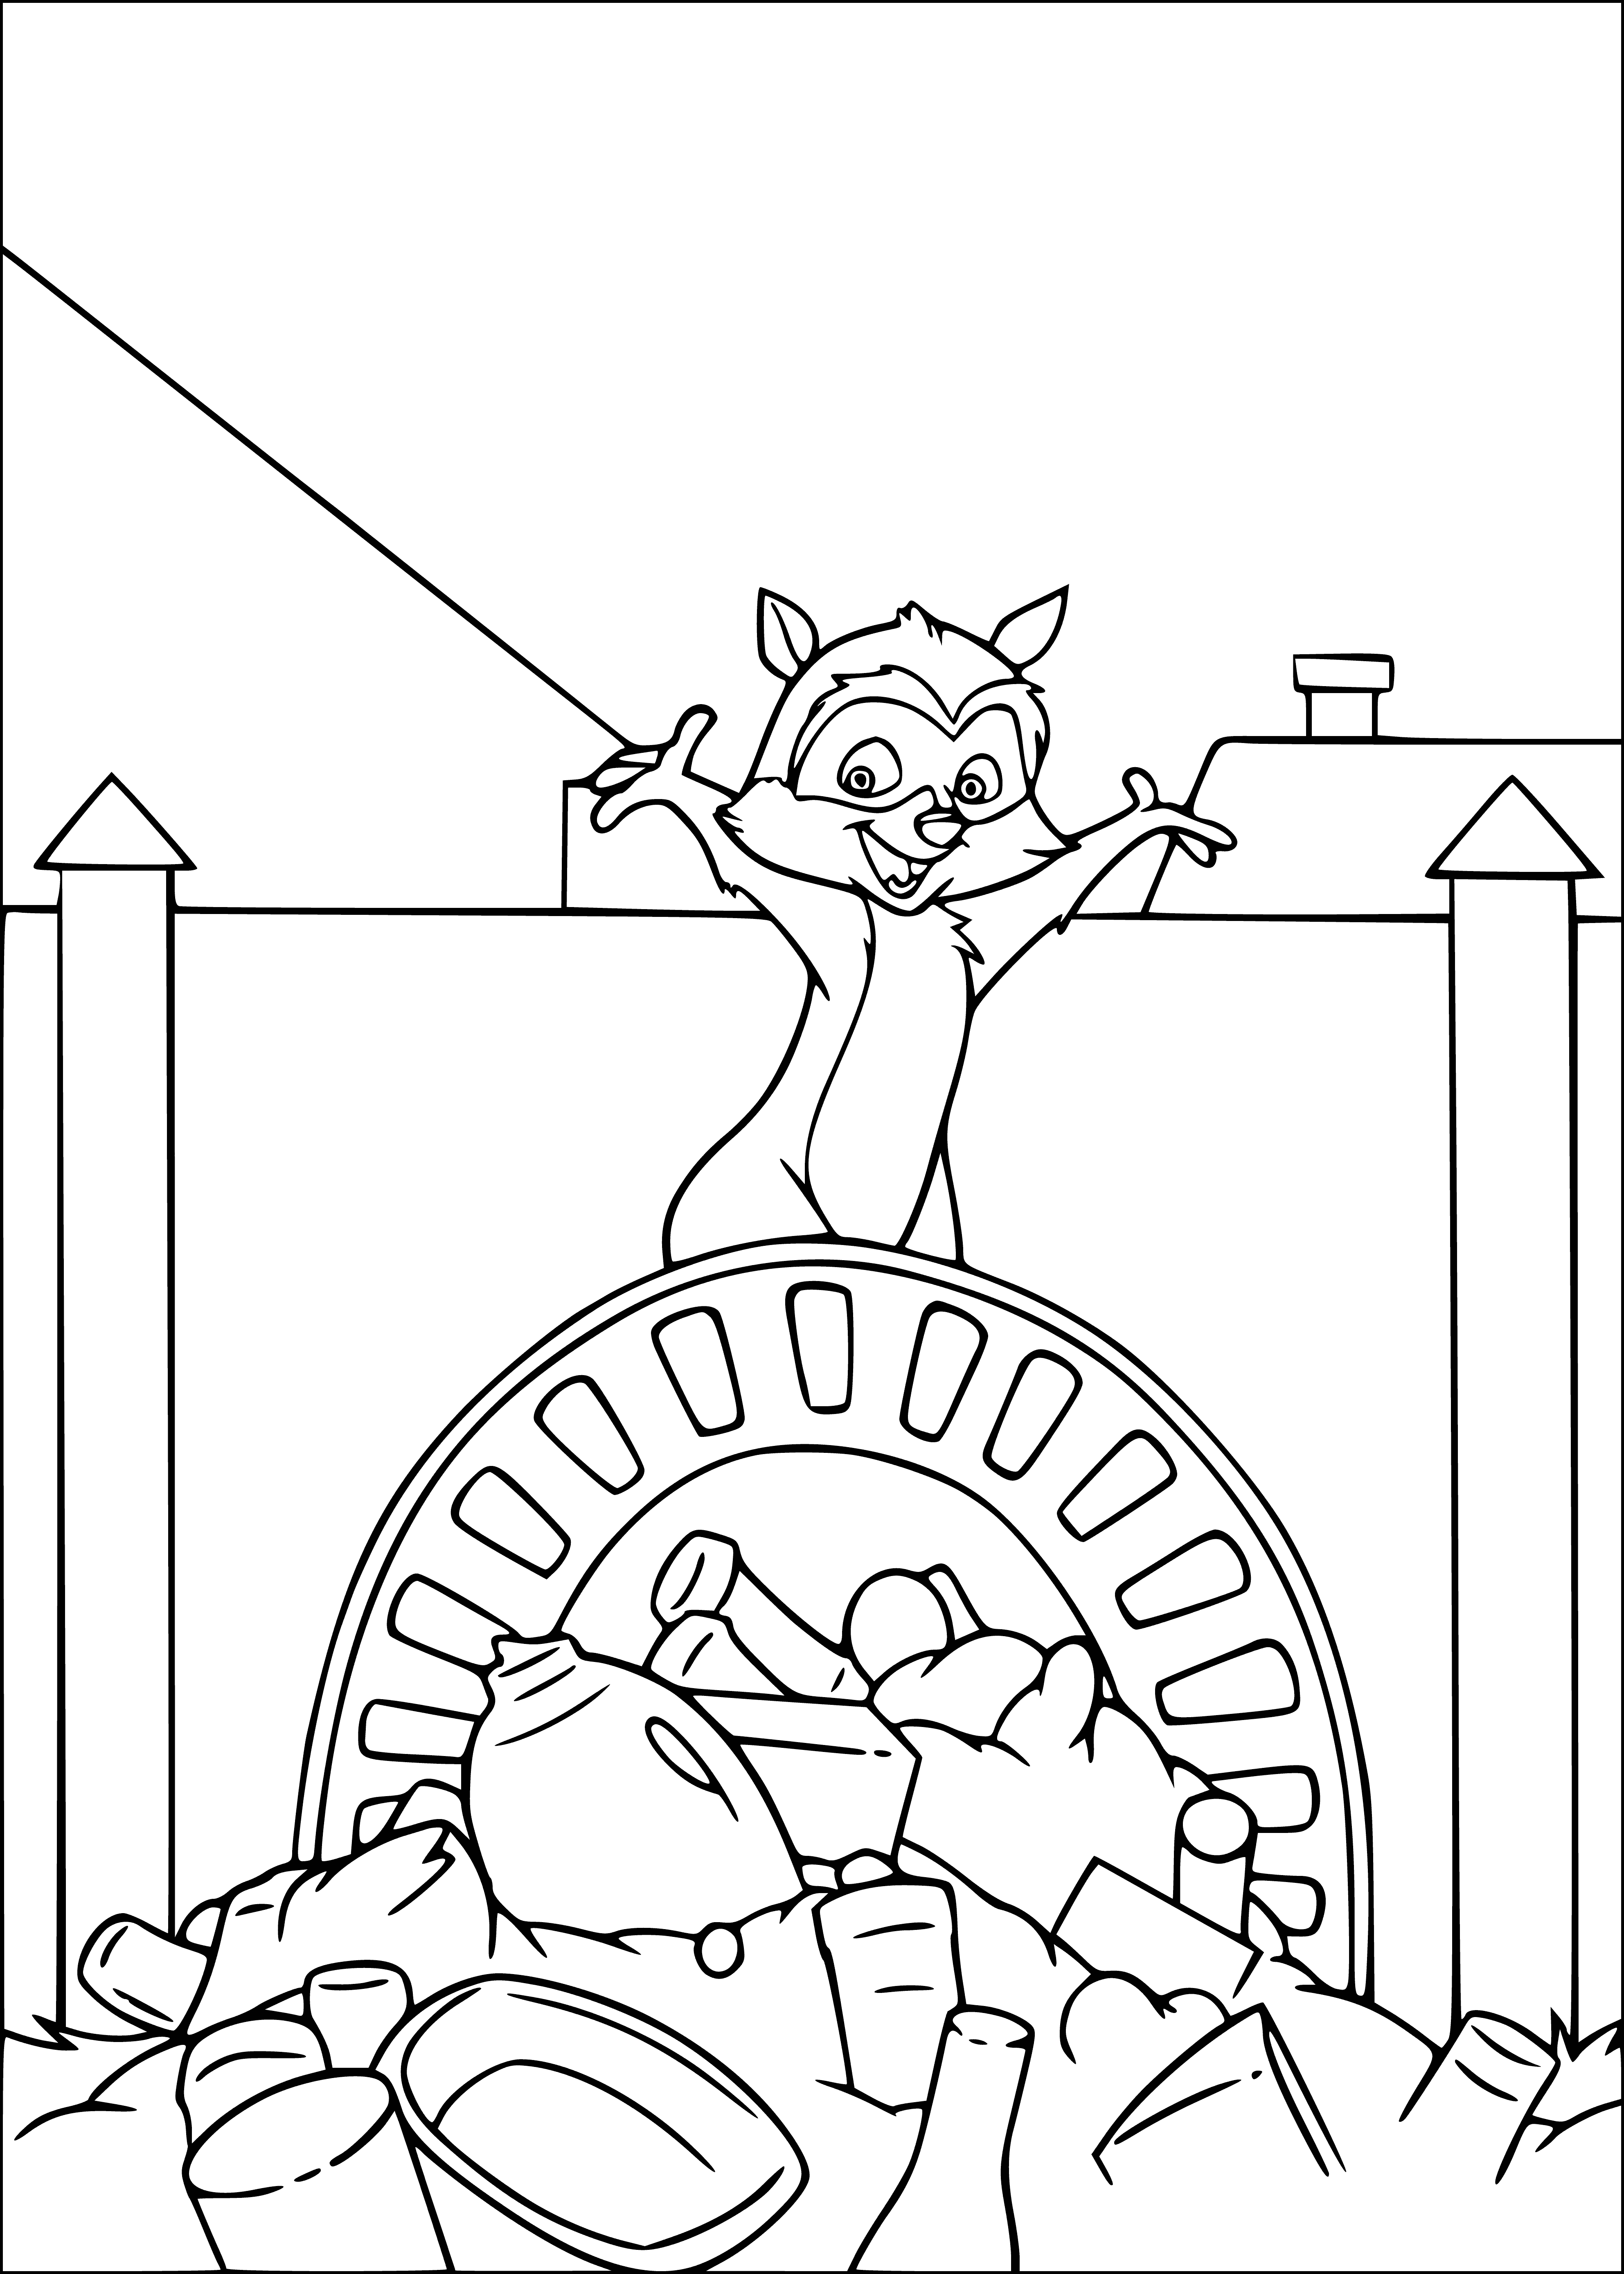 coloring page: Food-filled coloring page, with different types of food, containers, and a green plant.